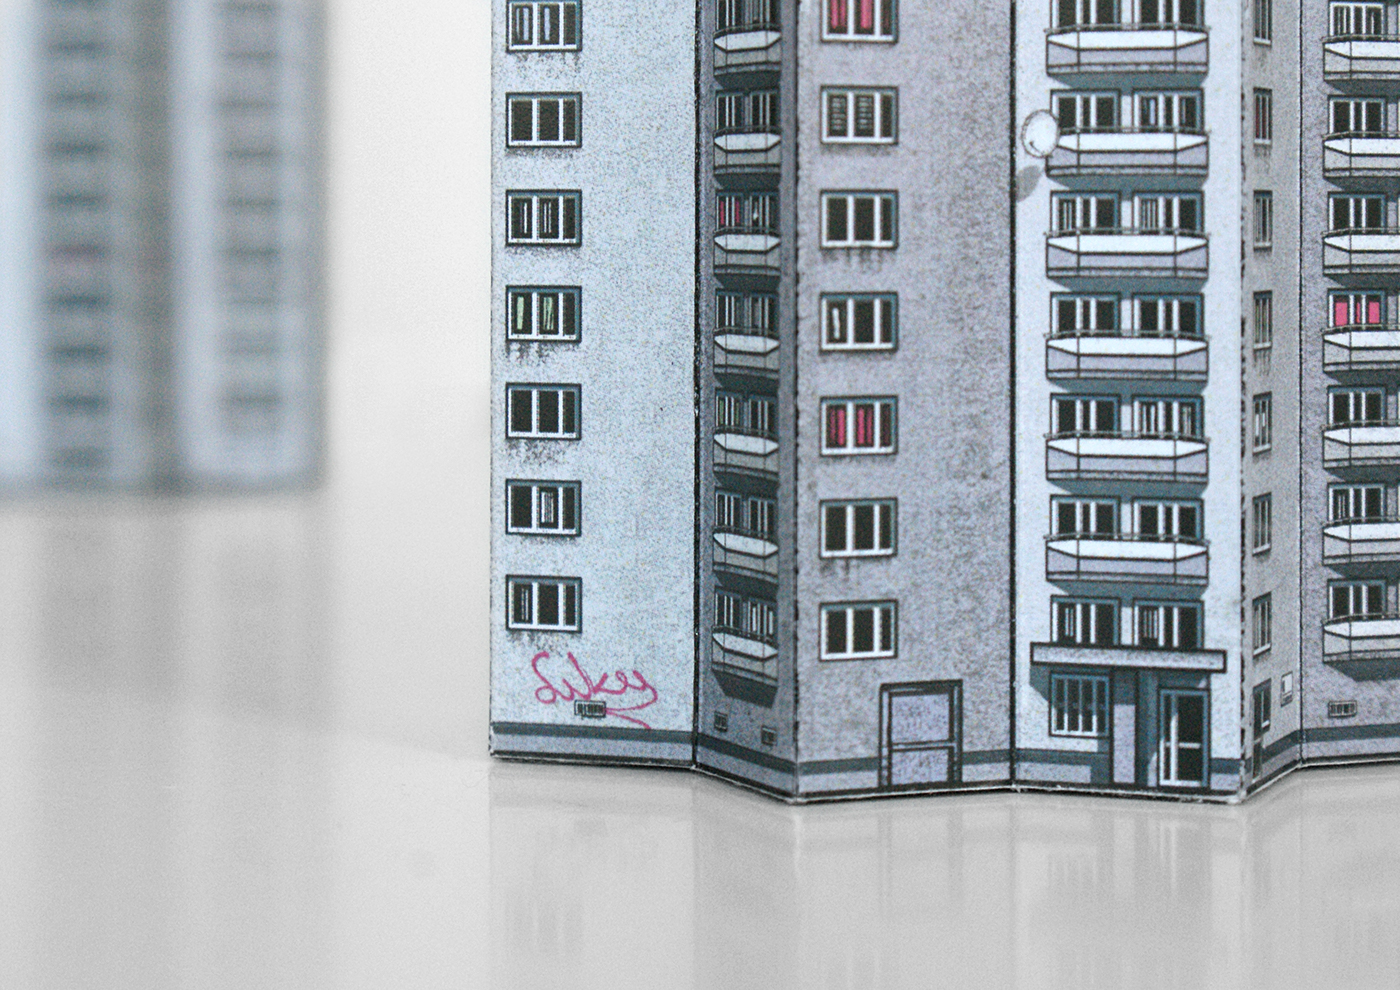 modernism Brutalism polish architecture  katowice DIY papercraft Pop Up City fold up blocks post-industrial recycled paper